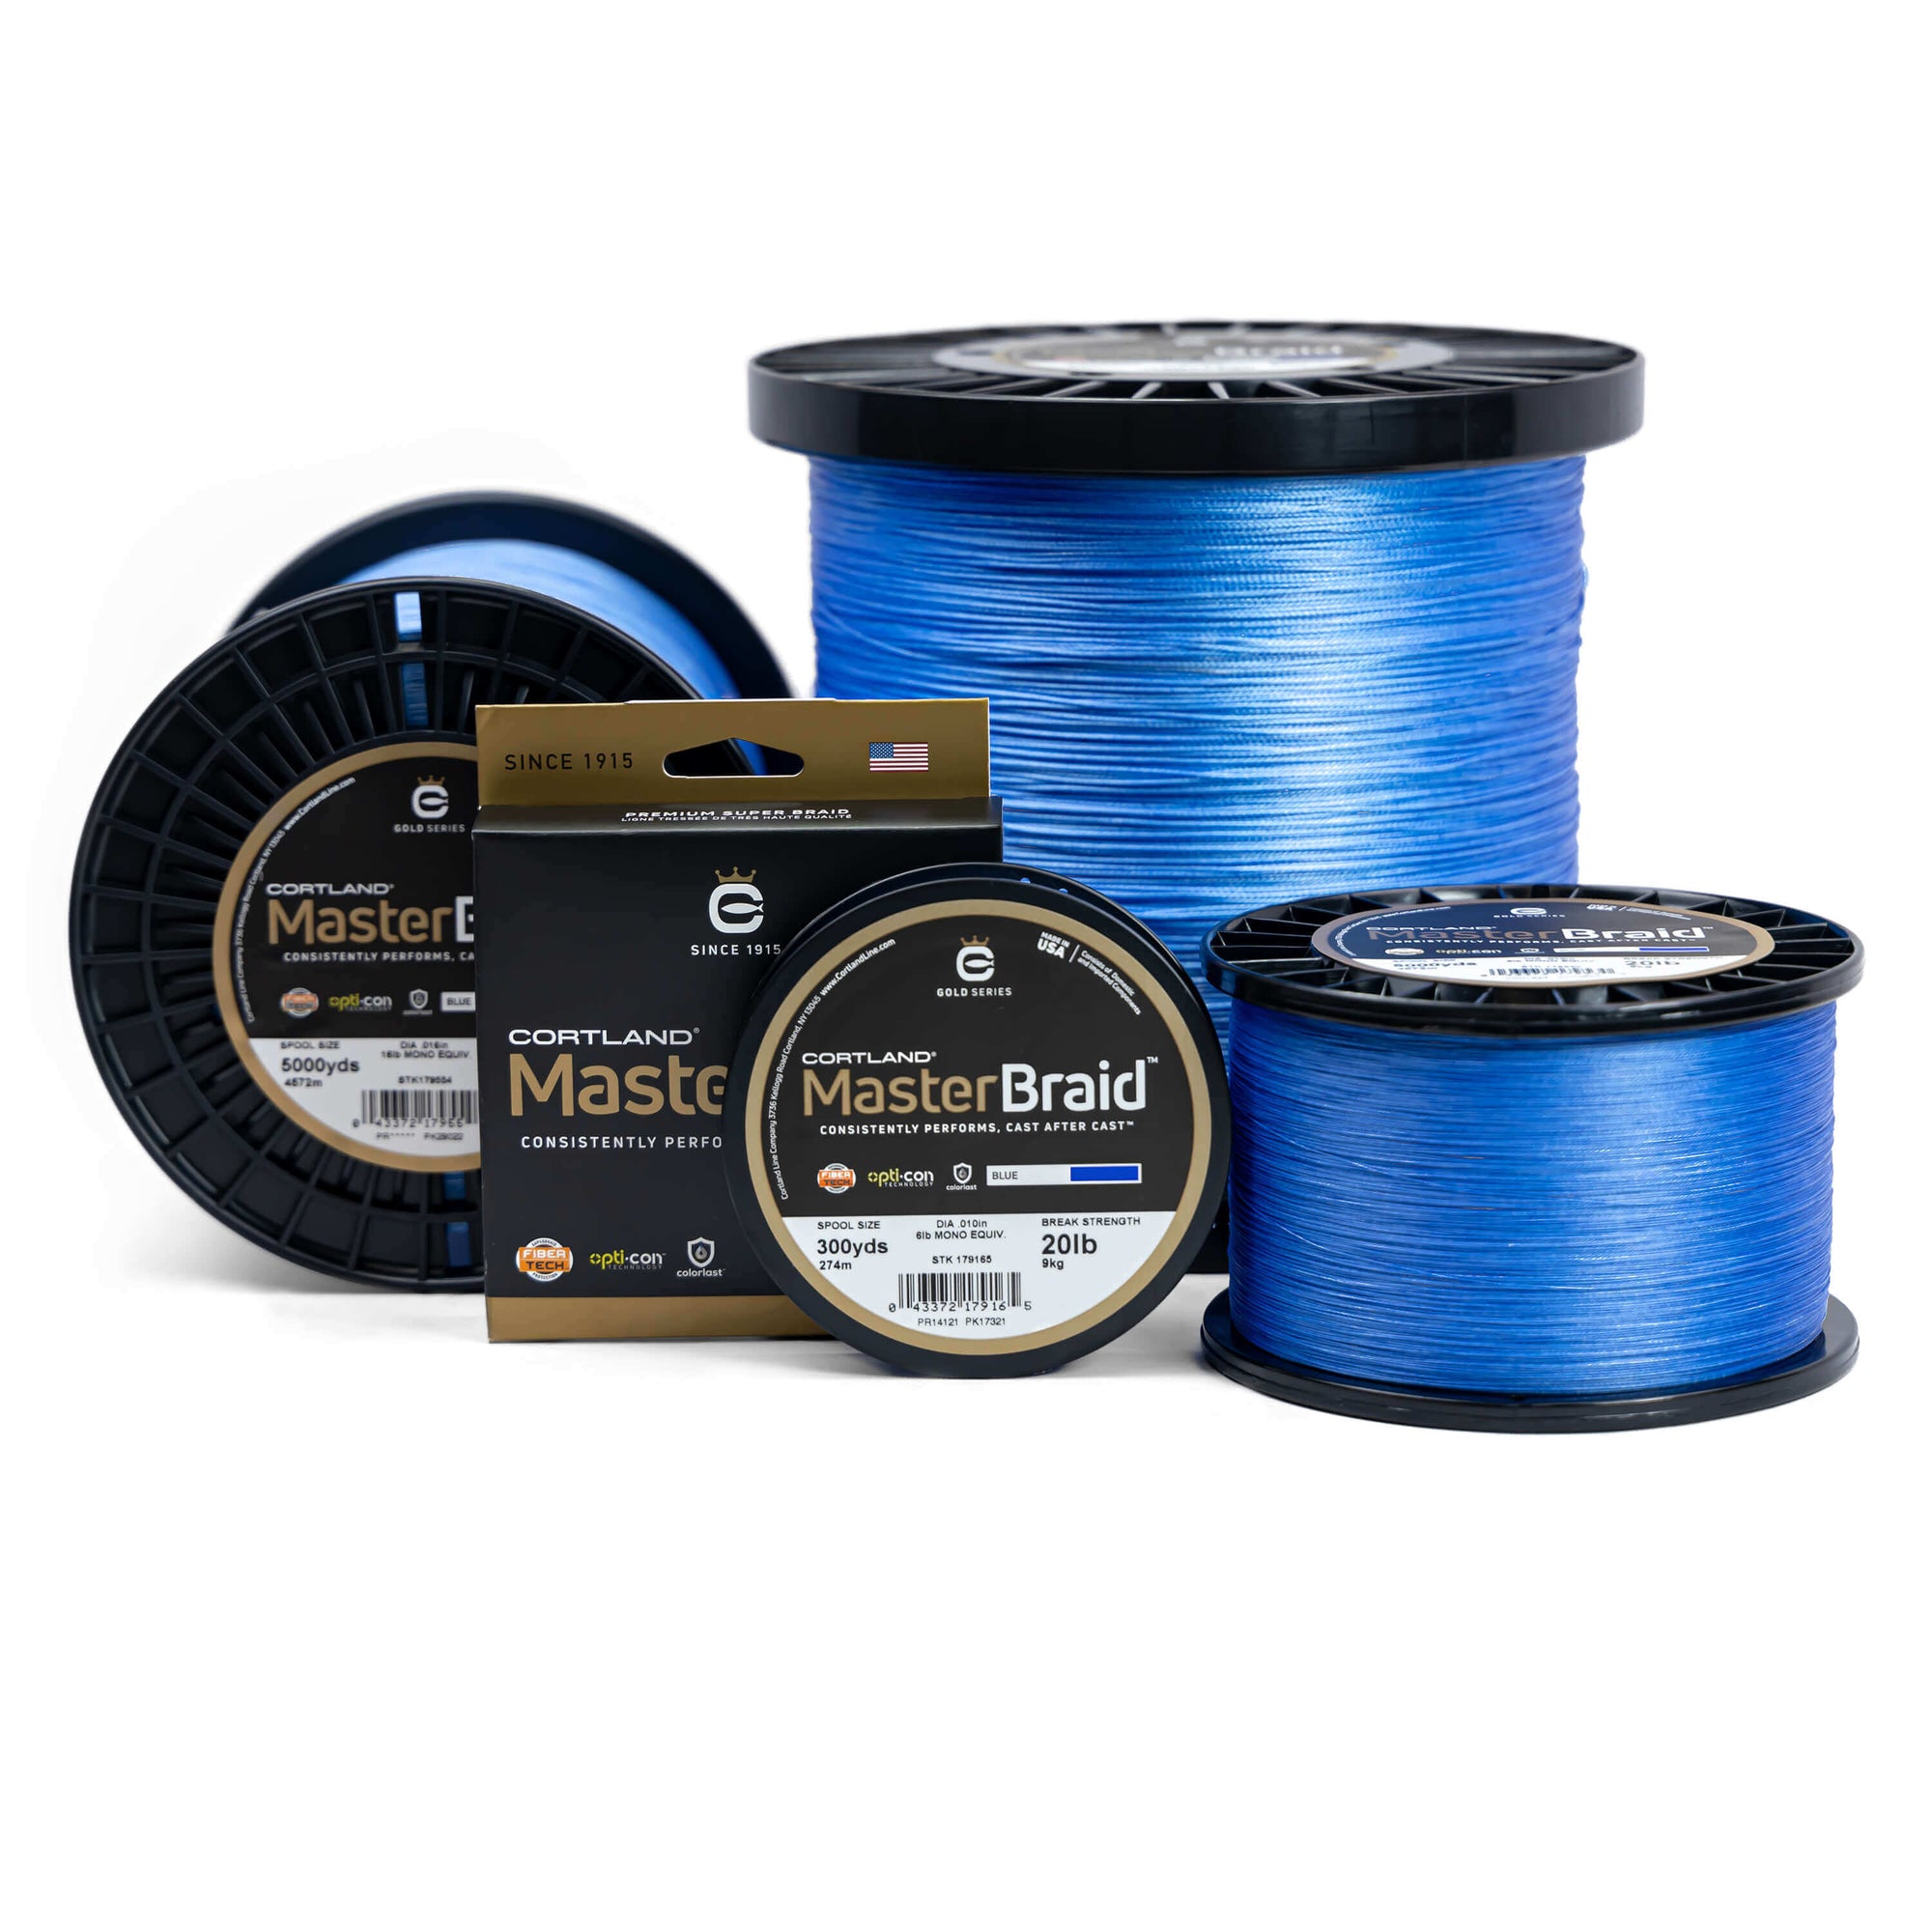 Cortland Master Braid - Blue fishing line. There is four spools in different sizes and one in a box.